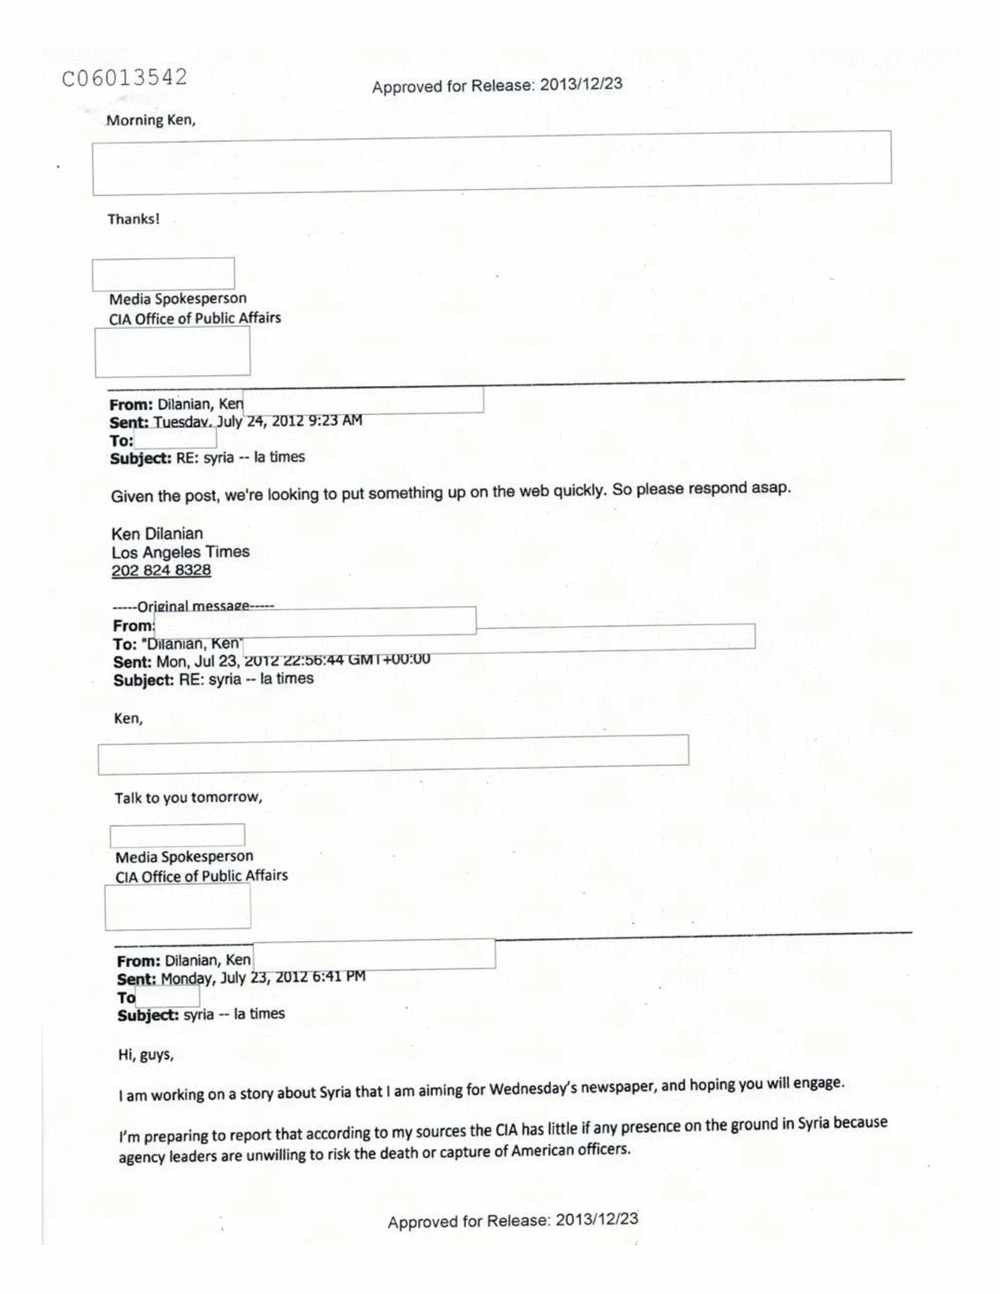 Page 401 from Email Correspondence Between Reporters and CIA Flacks